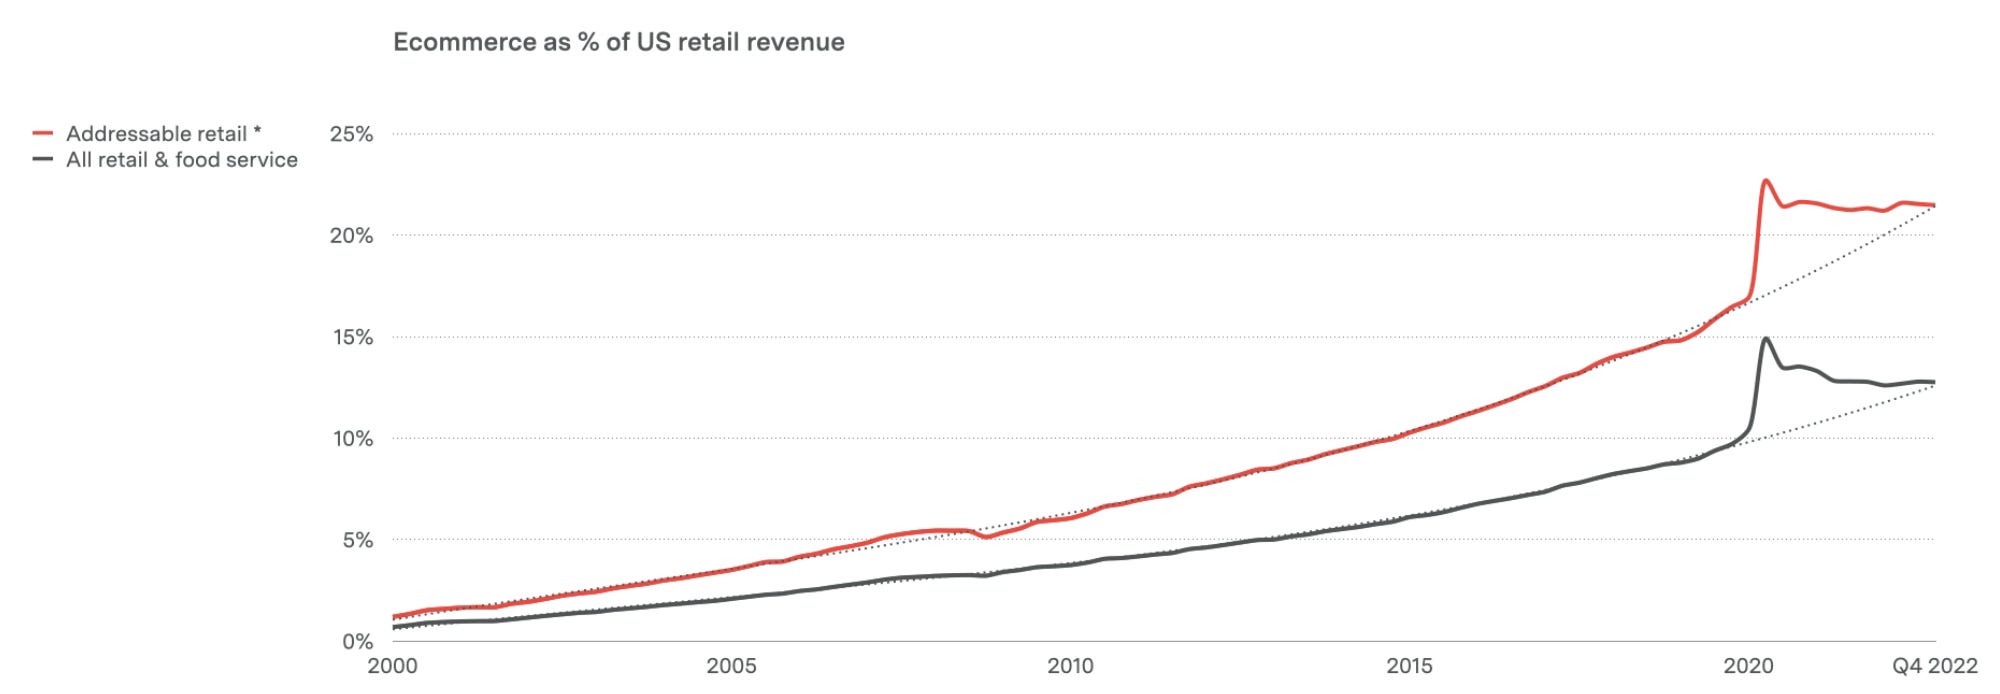 A line graph depicting ecommerce as a percentage of US retail revenue from 2000. There is steady but gently accelerating growth followed by a surge and plateau in 2020